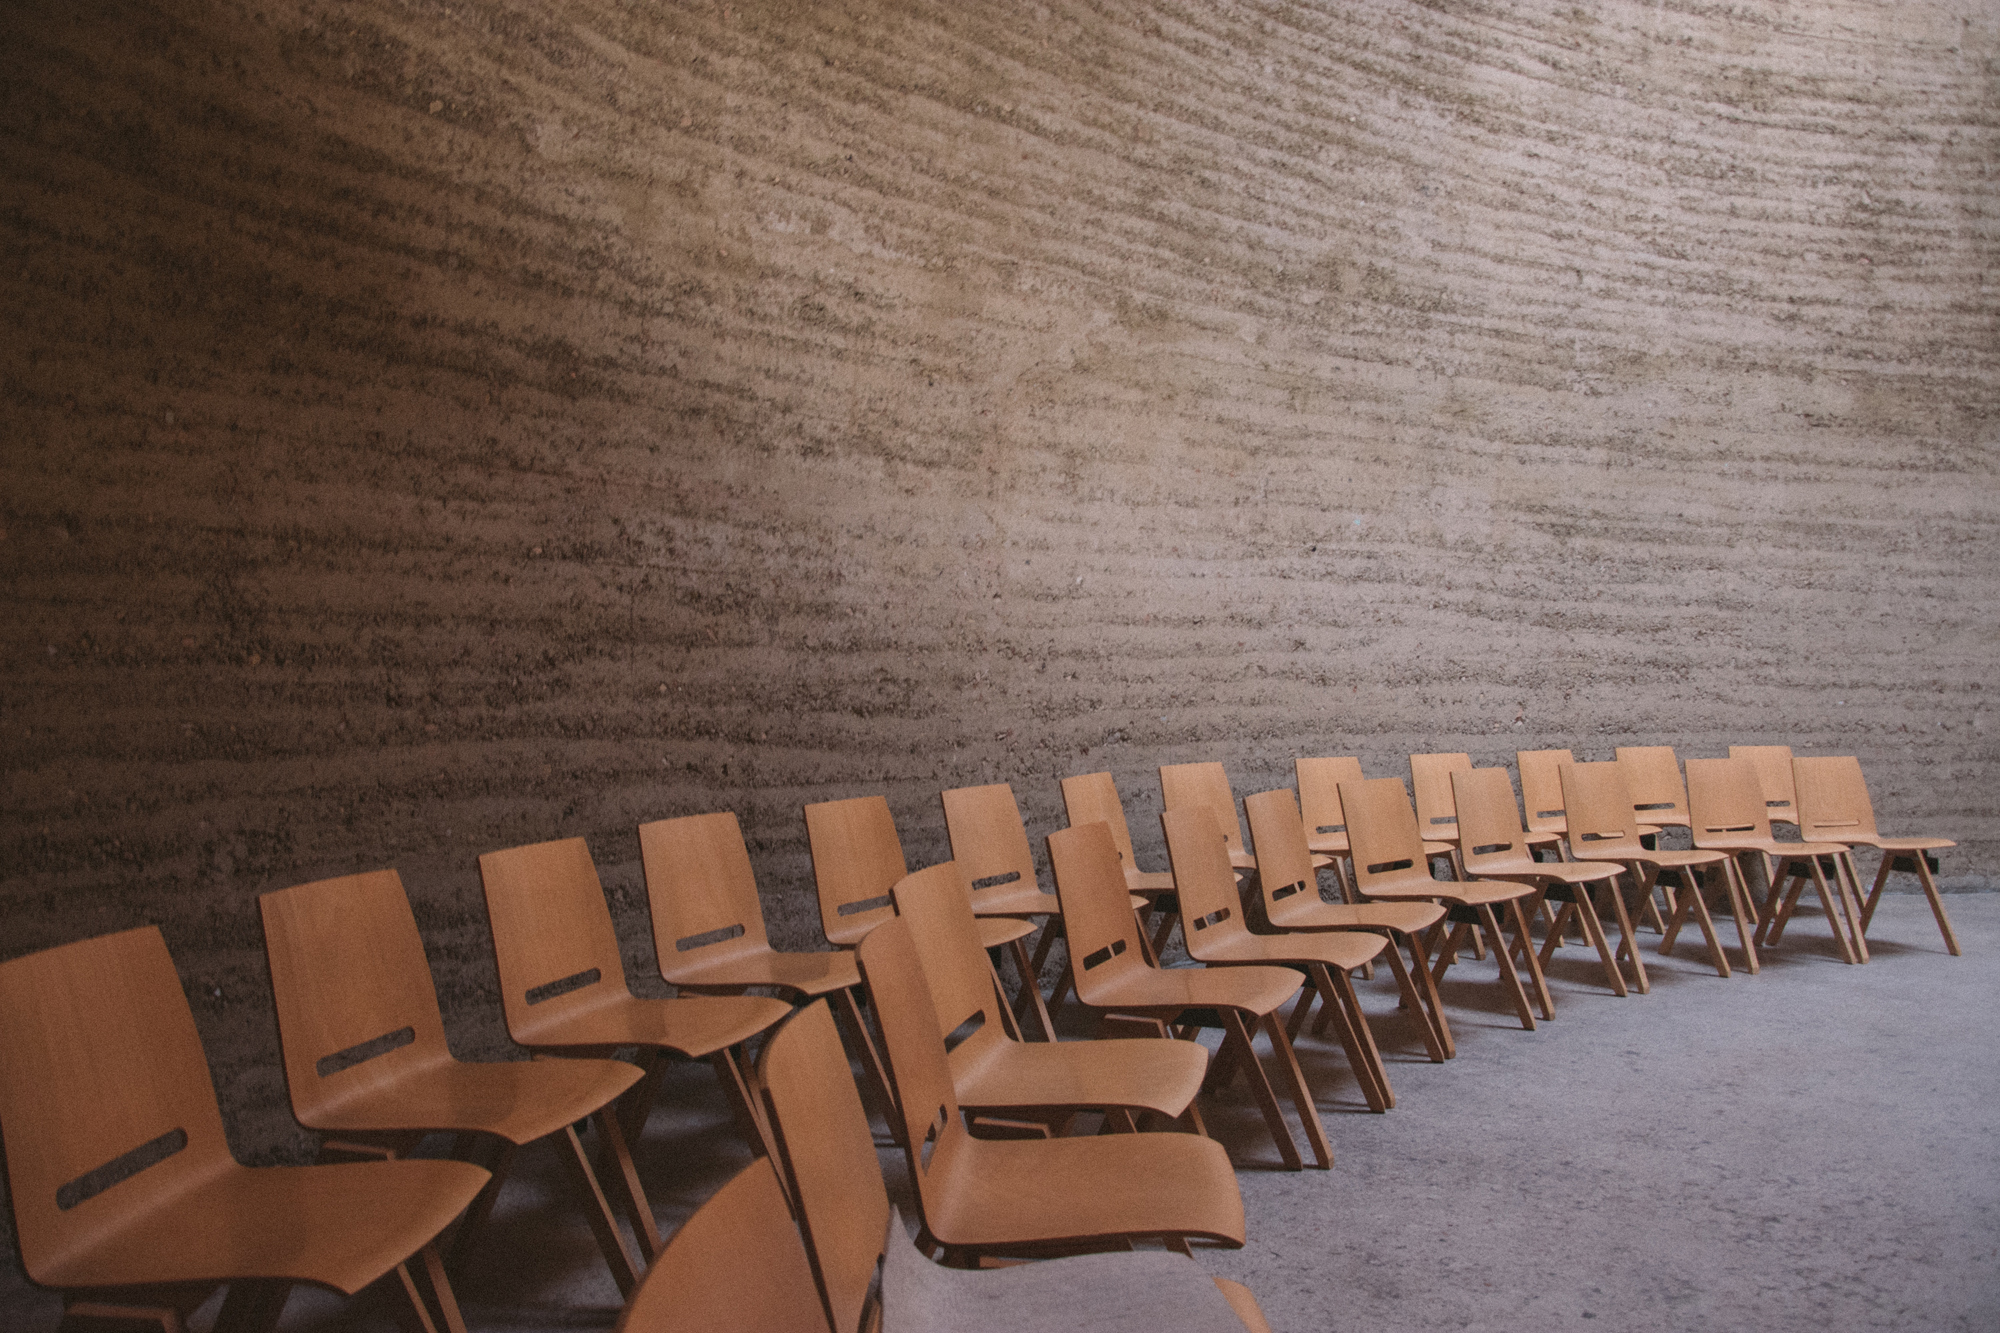 A classroom with two rows of empty chairs. (Photo by Daniil Kuželev)